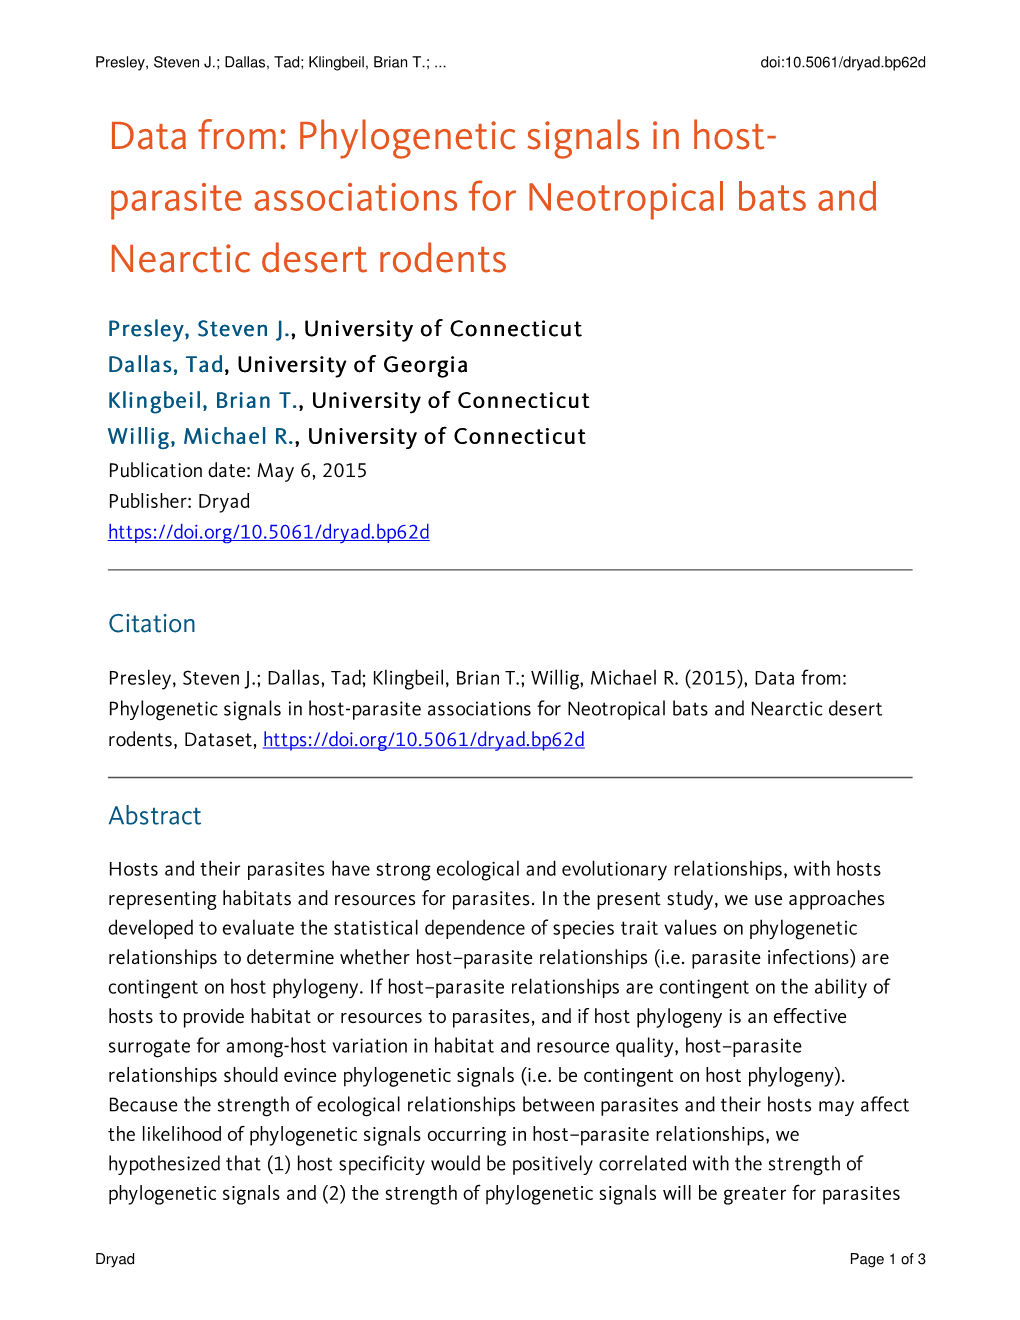 Data From: Phylogenetic Signals in Host-Parasite Associations for Neotropical Bats and Nearctic Desert Rodents, Dataset